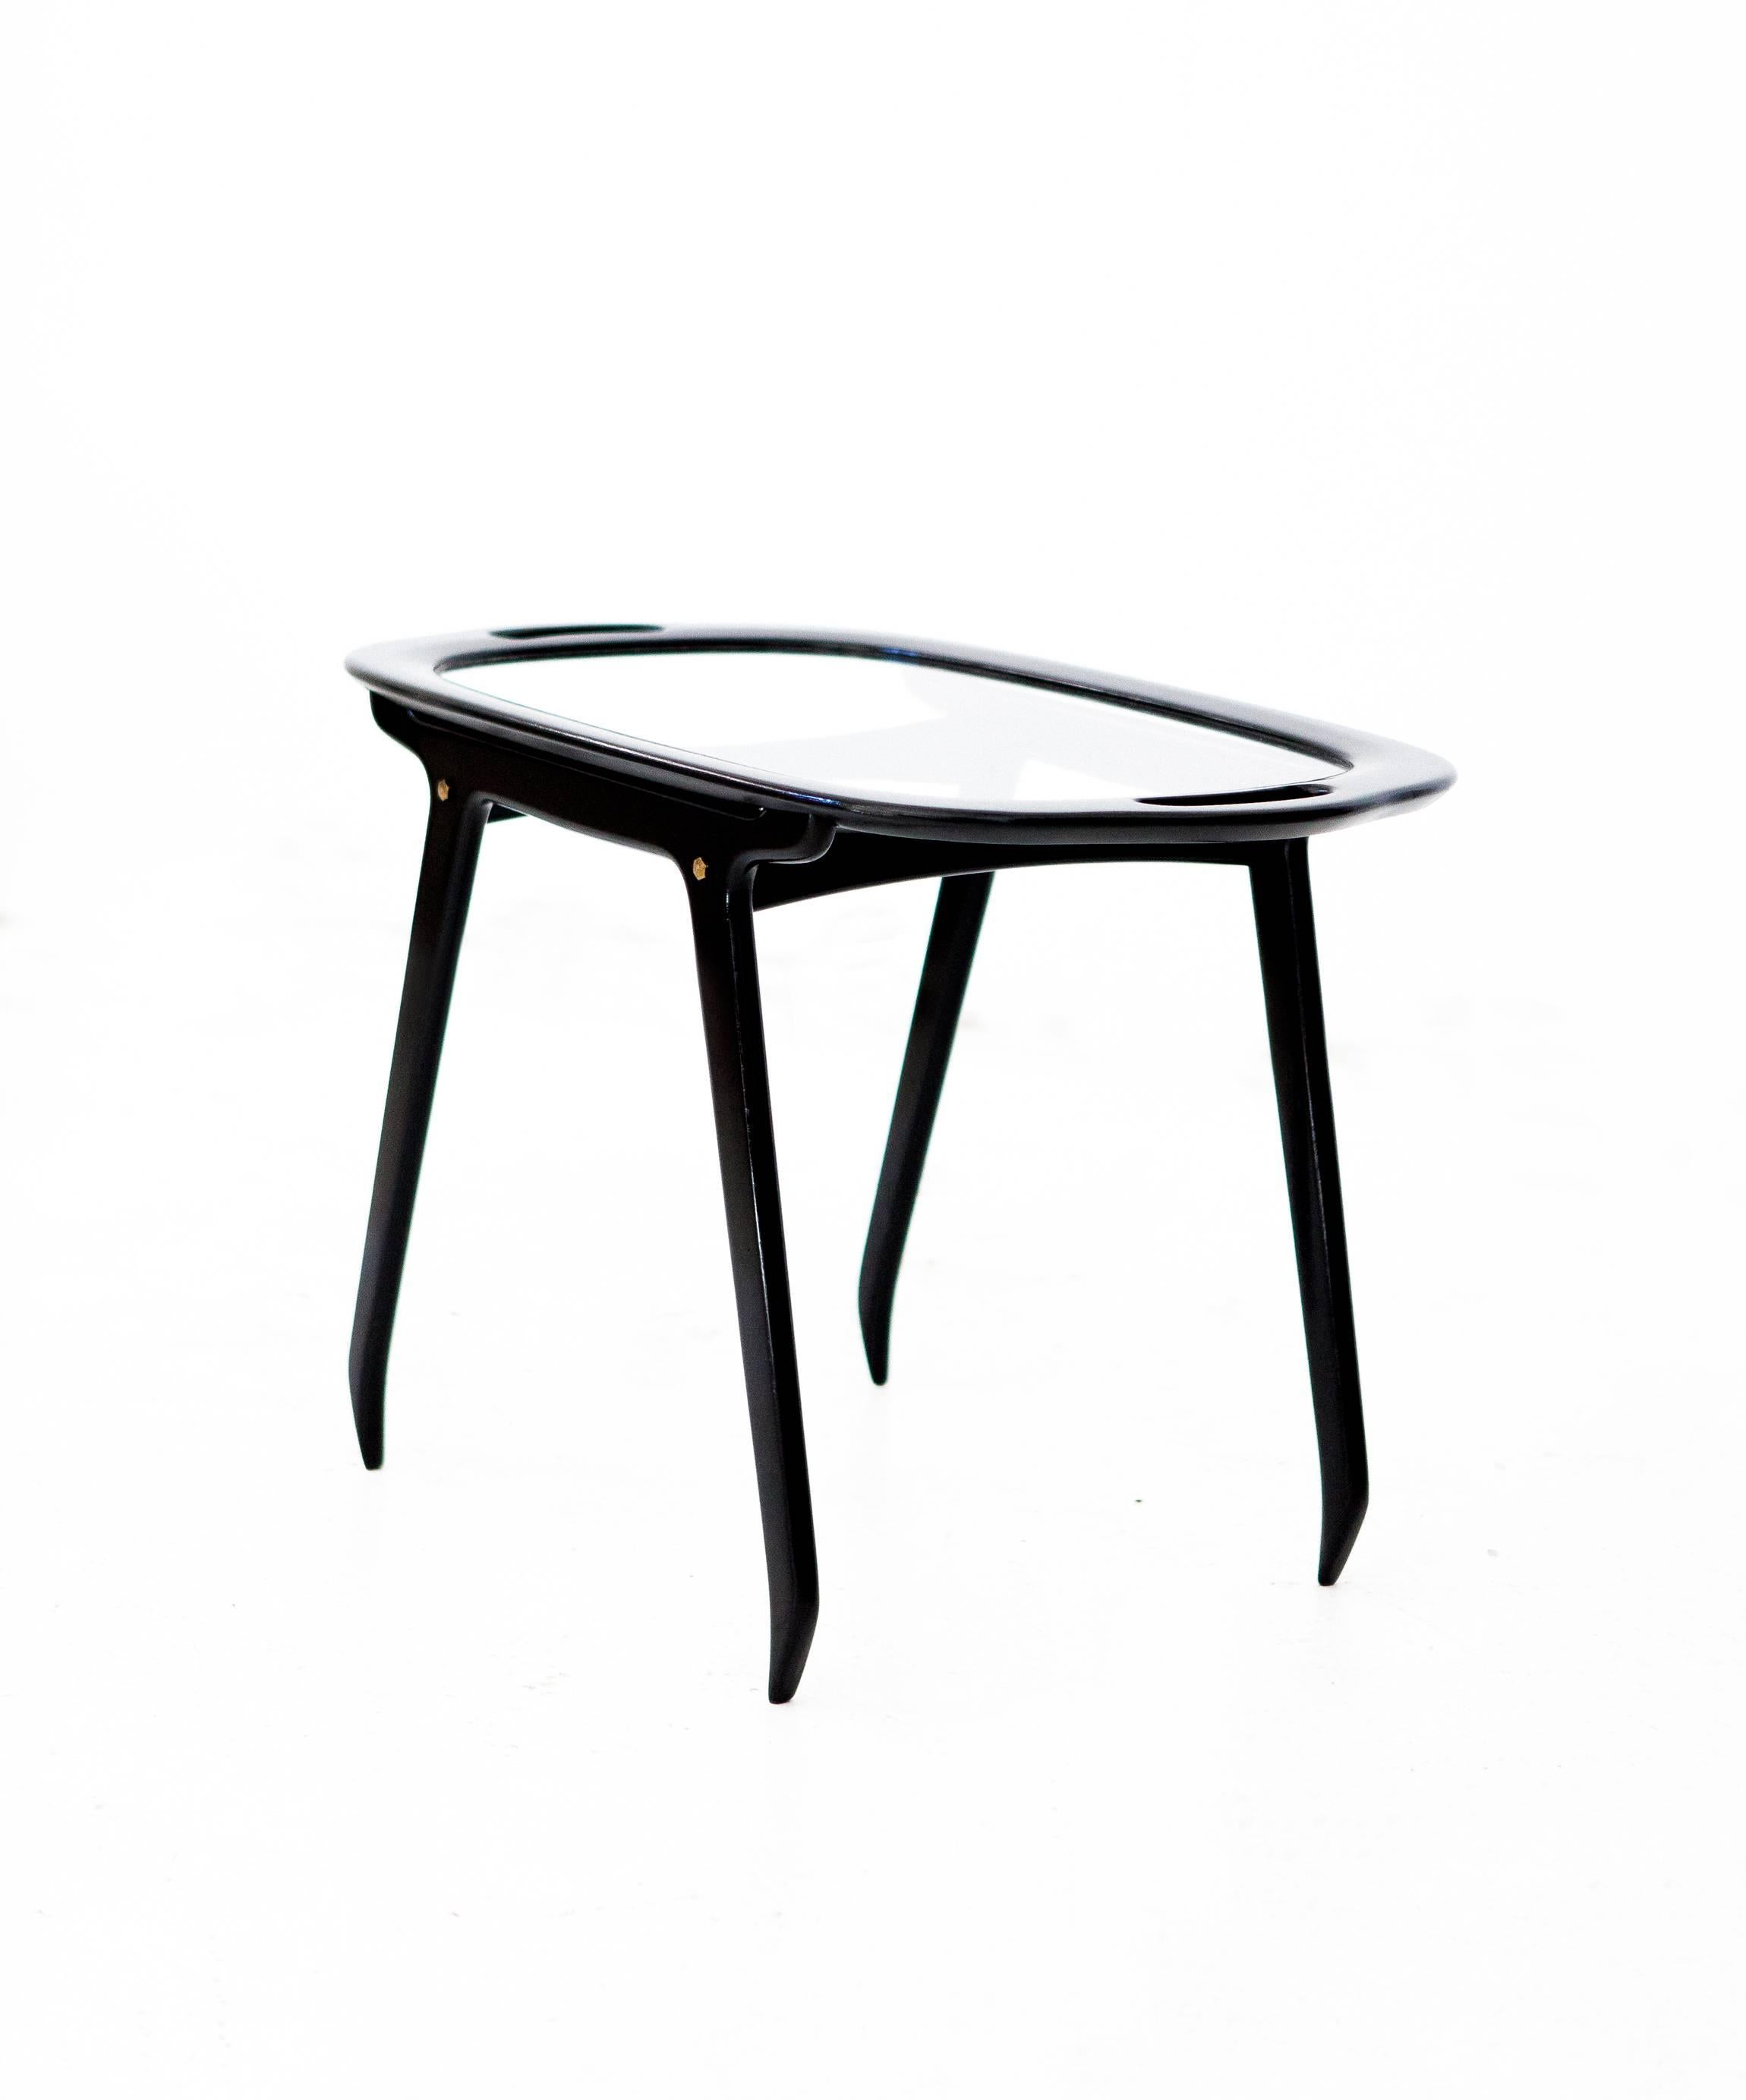 Mid-Century Modern Italian Black Wood and Glass Coffee or Service Table by Cesare Lacca, 1950s